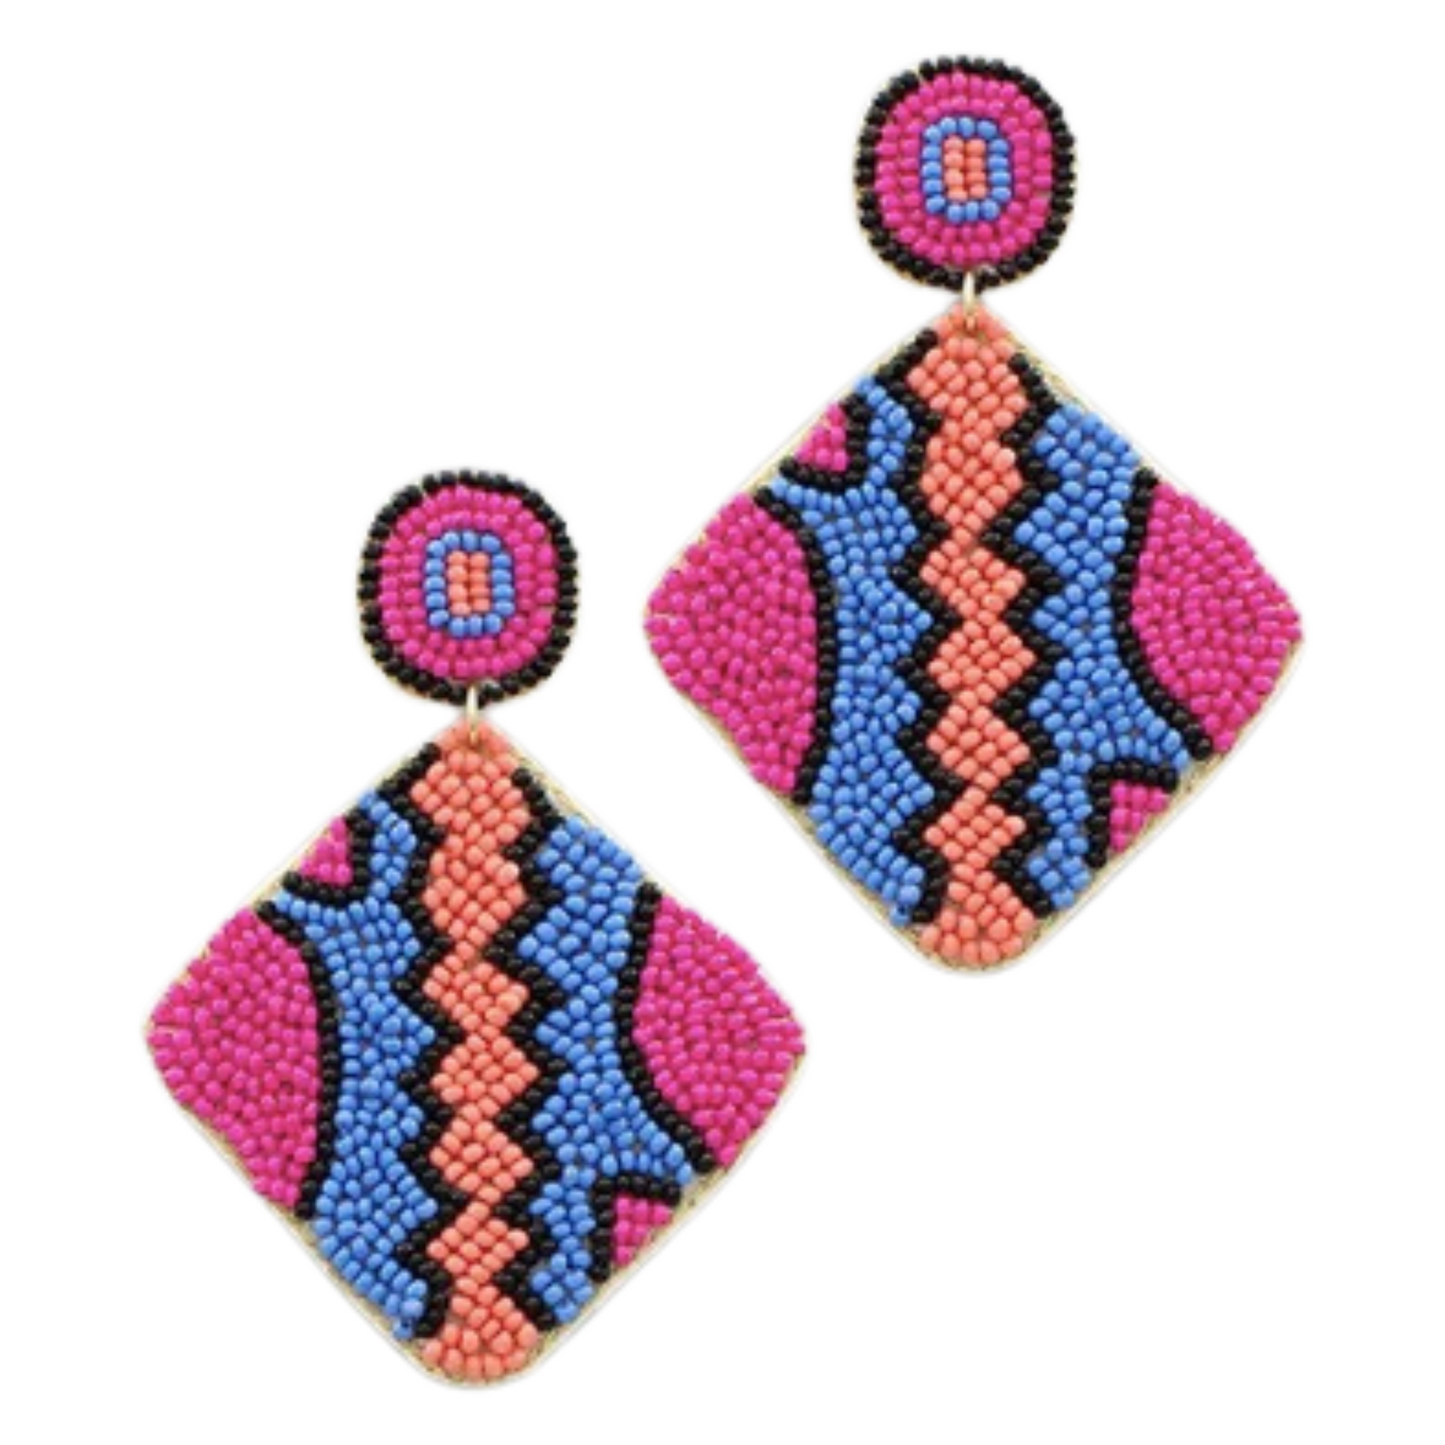 These Inda Rhombus Earrings feature a vibrant tribal design in a unique rhombus shape. The dangle design adds movement and interest to these colorful earrings. Enhance your style with these multicolor earrings that will surely make a statement.